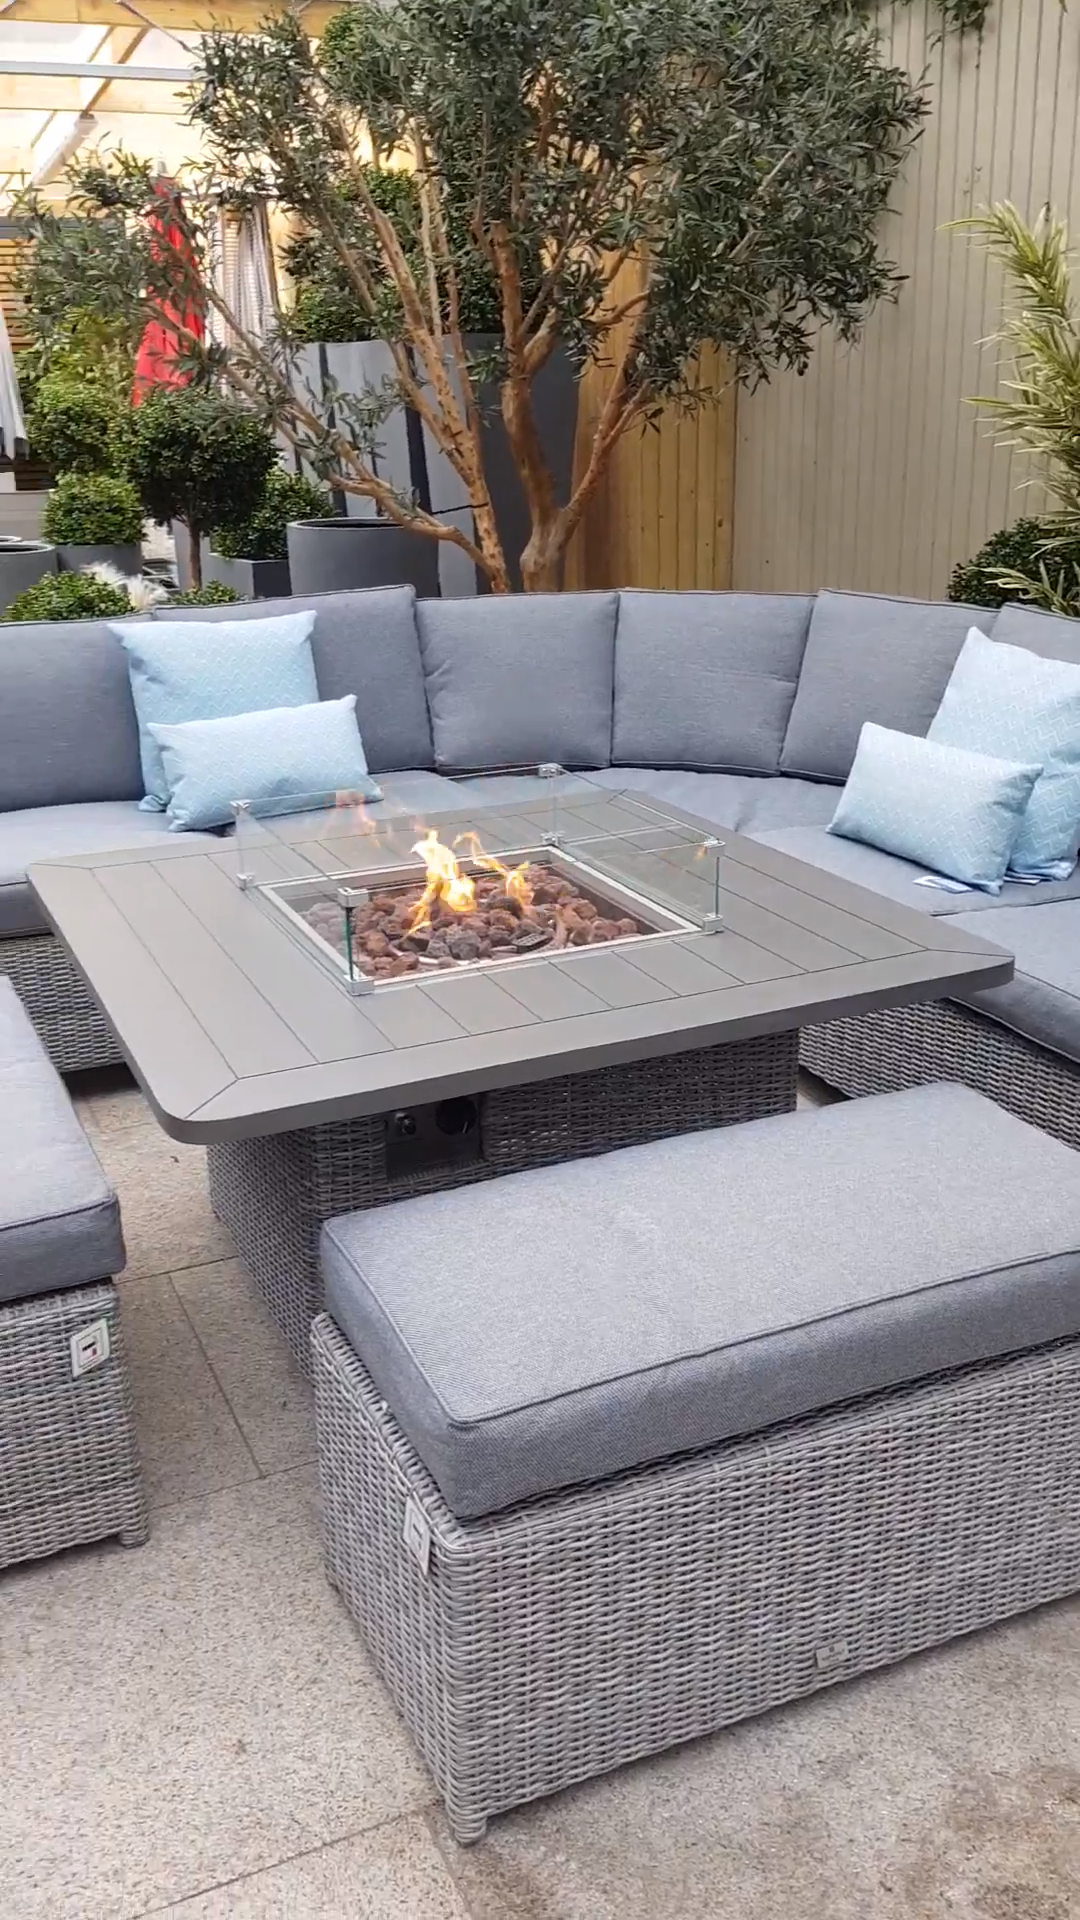 Garden furniture with fire pit -   Search Results    Dream Homes Floor Plans